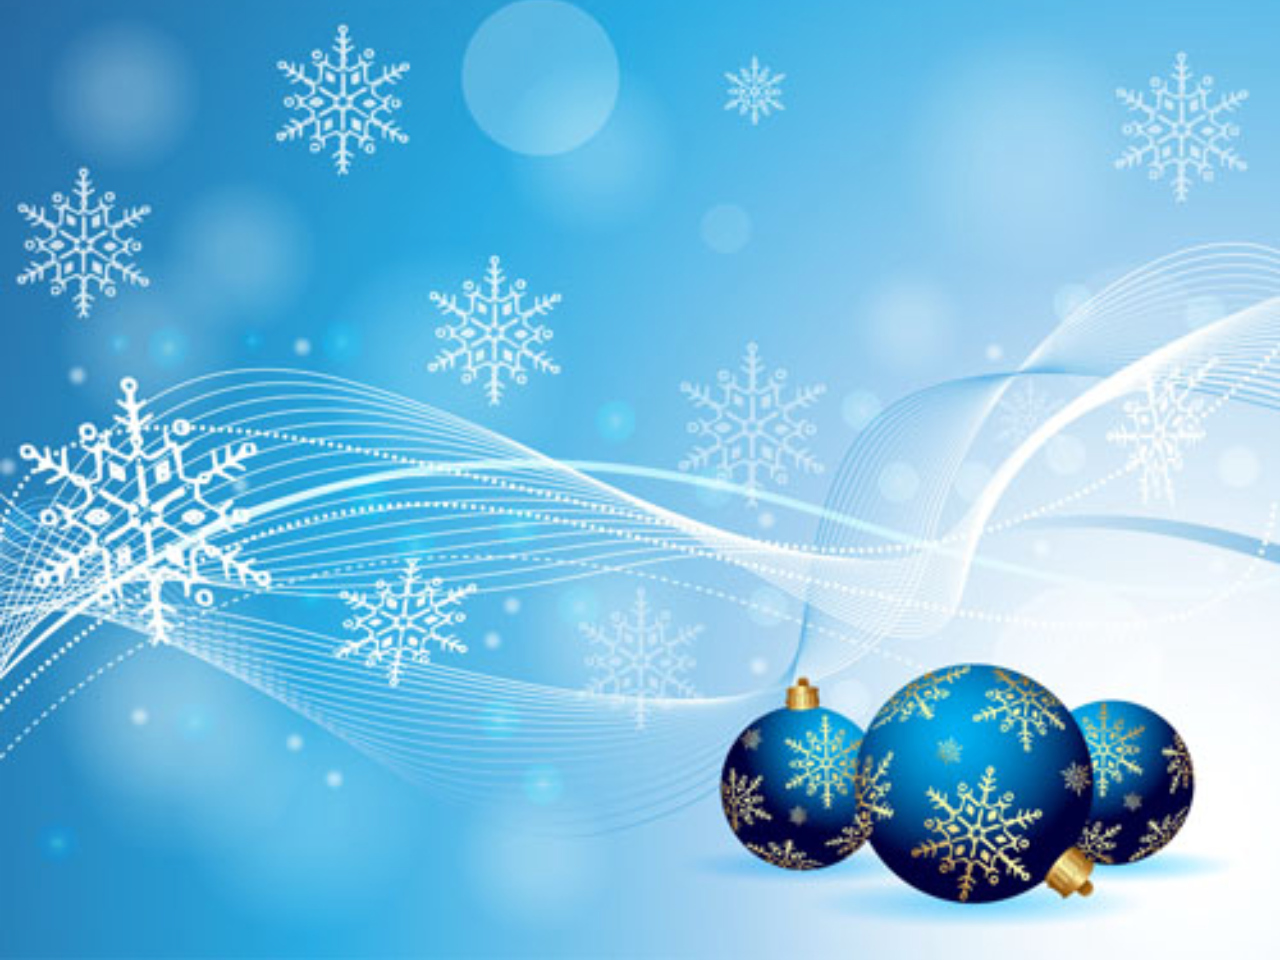 Merry Christmas - Thank You For Your Order Christmas - HD Wallpaper 